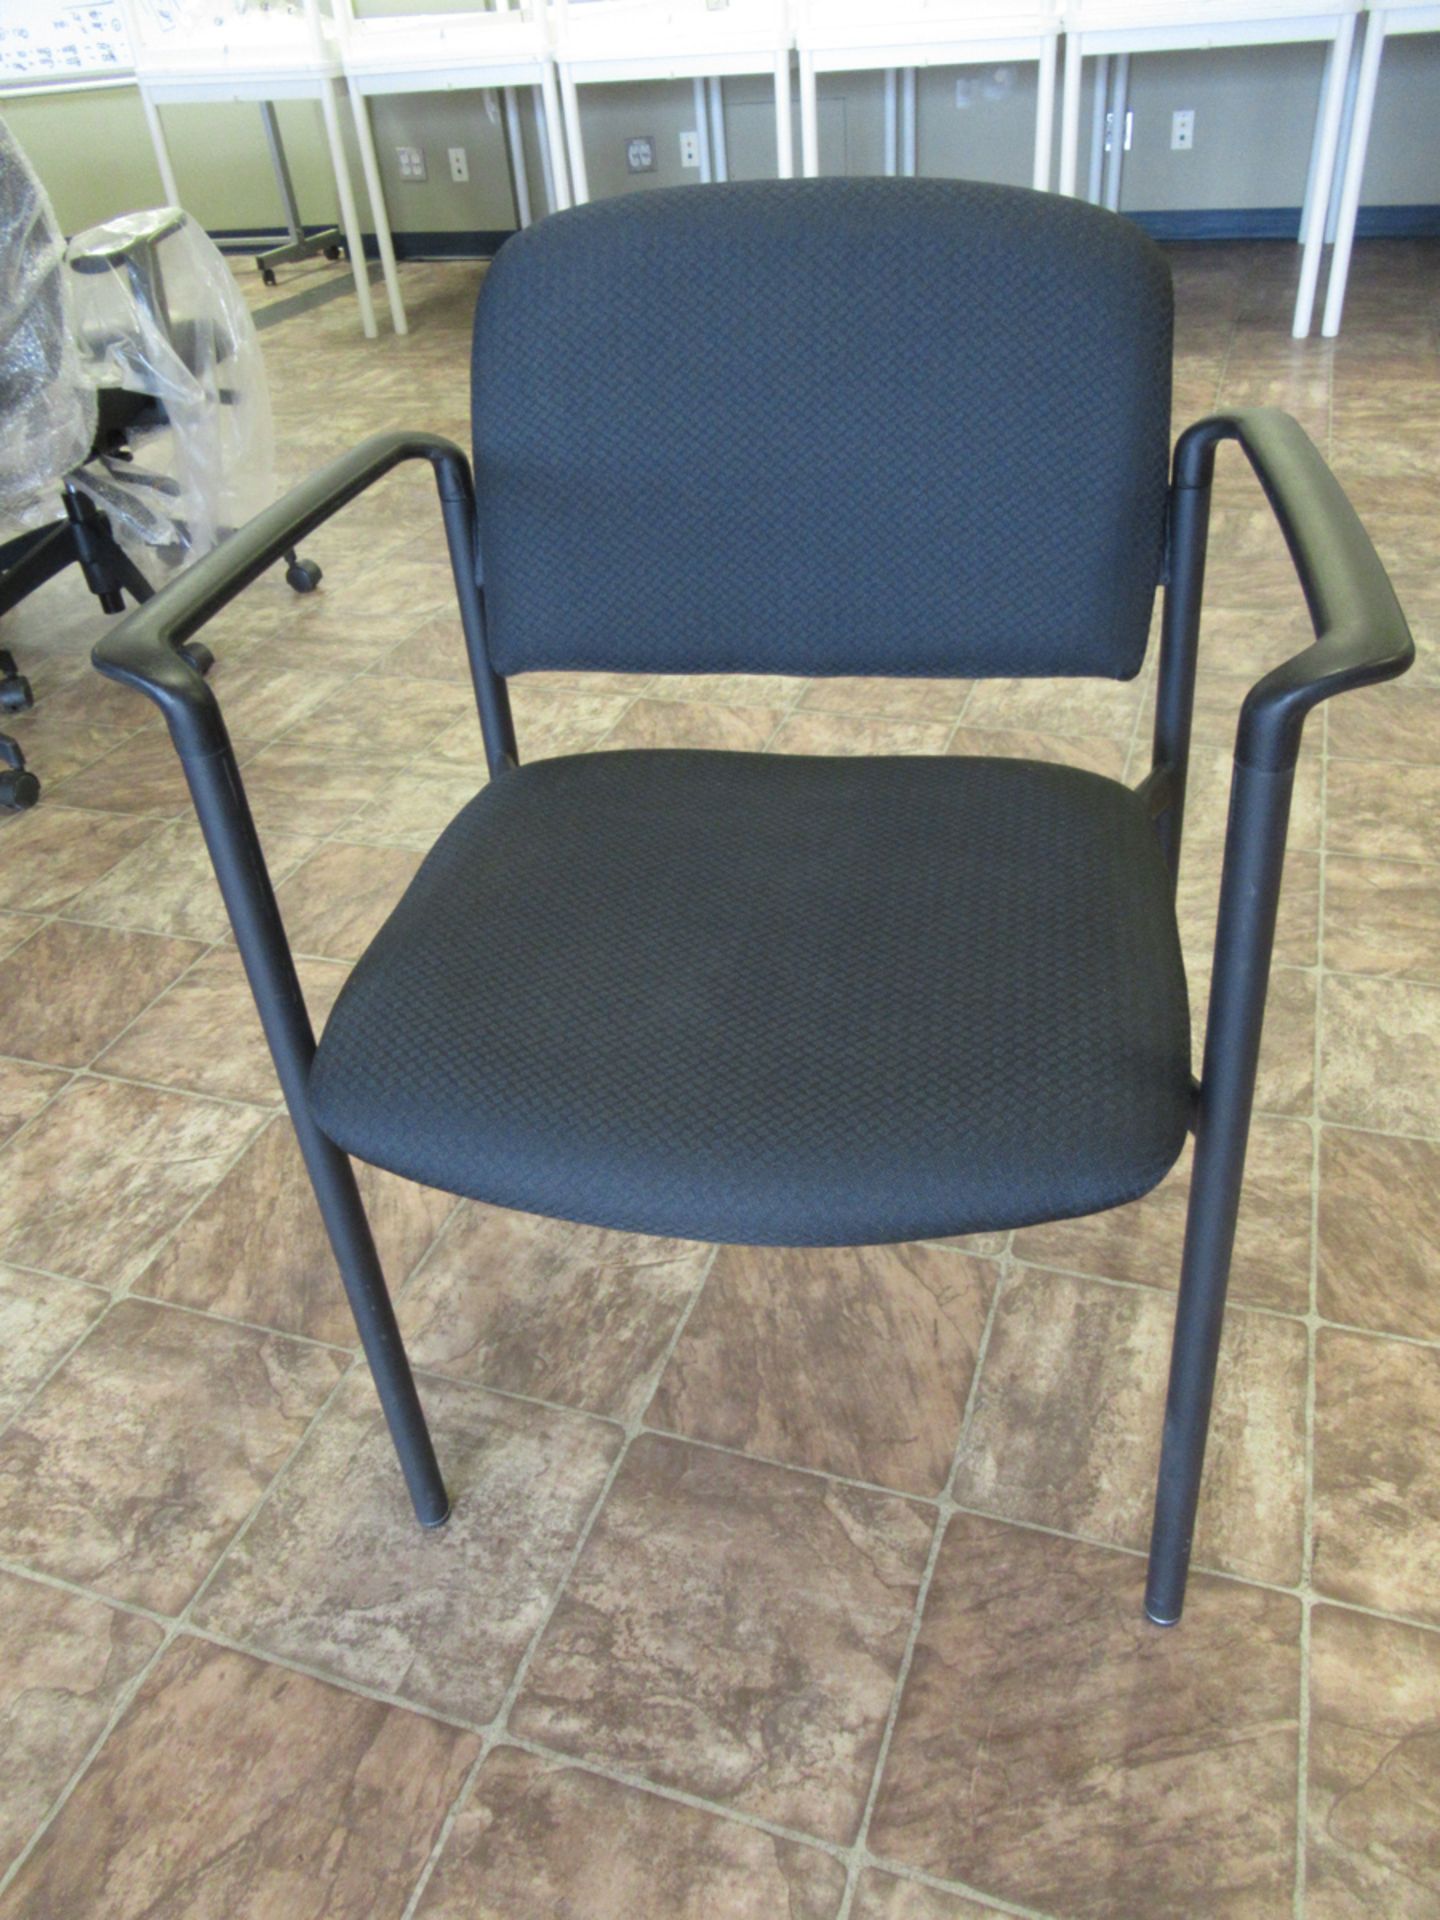 CHAIR (NEW)